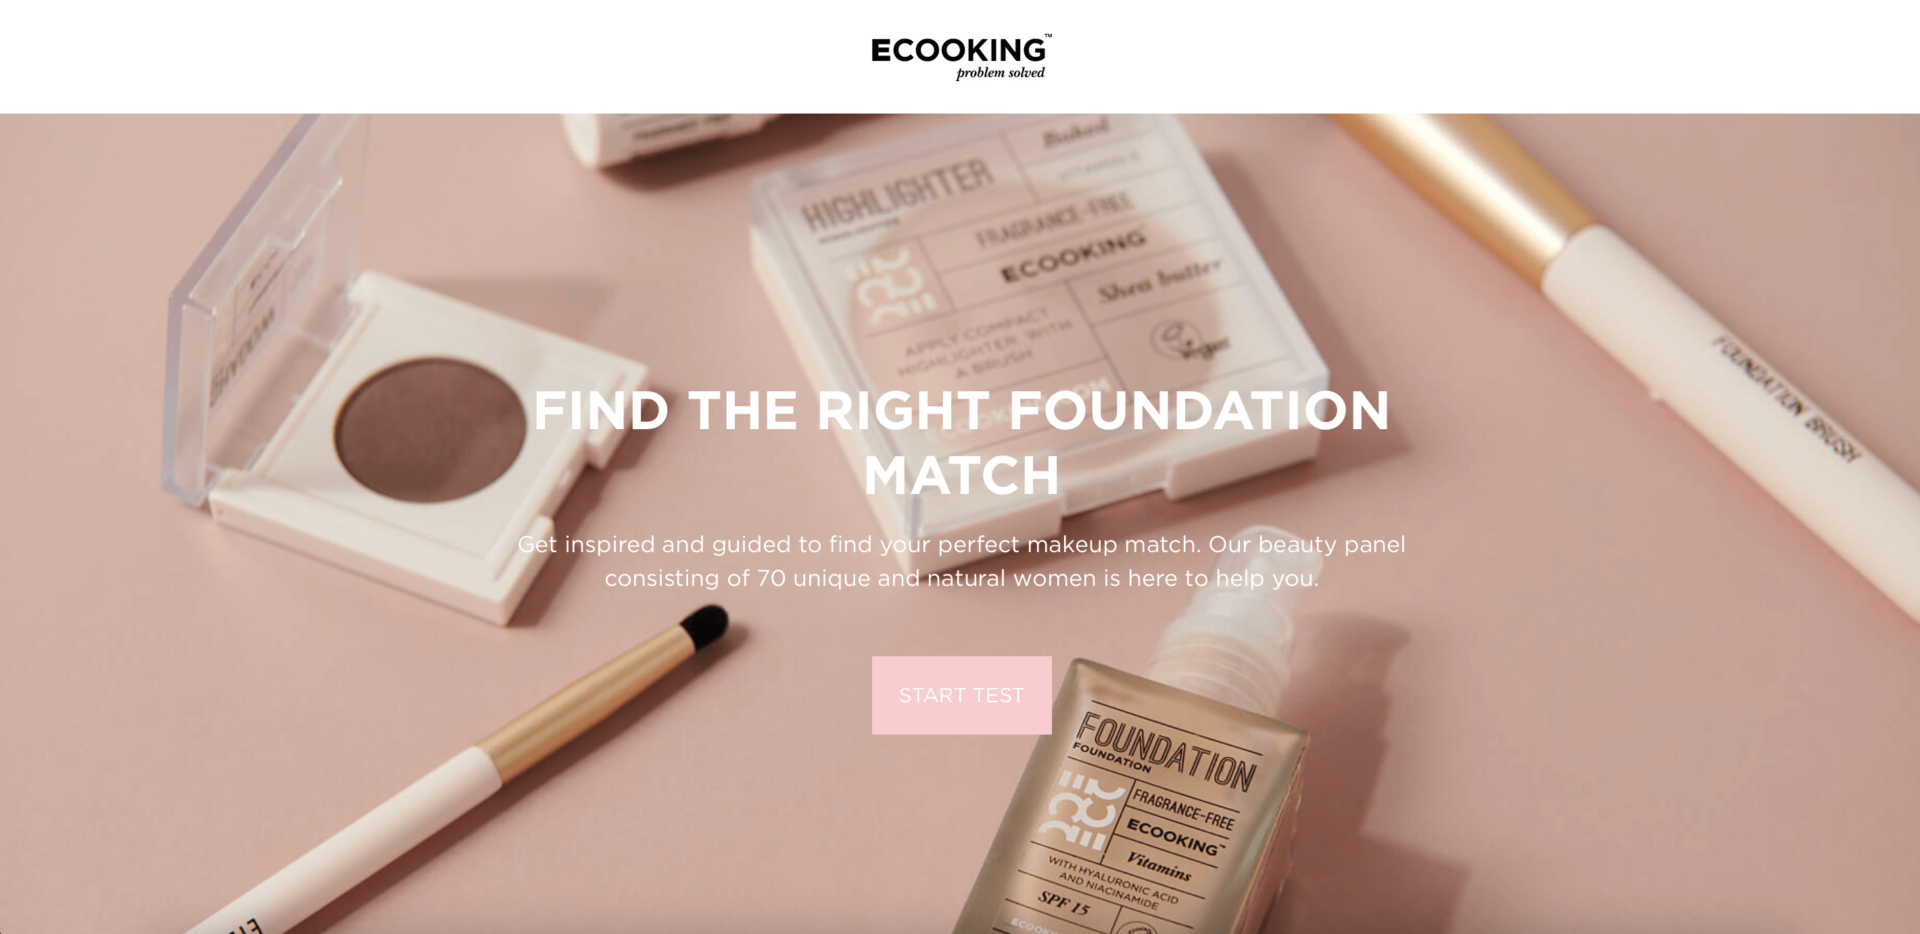 The foundation finder personality test done by Ecooking using the Playable platform